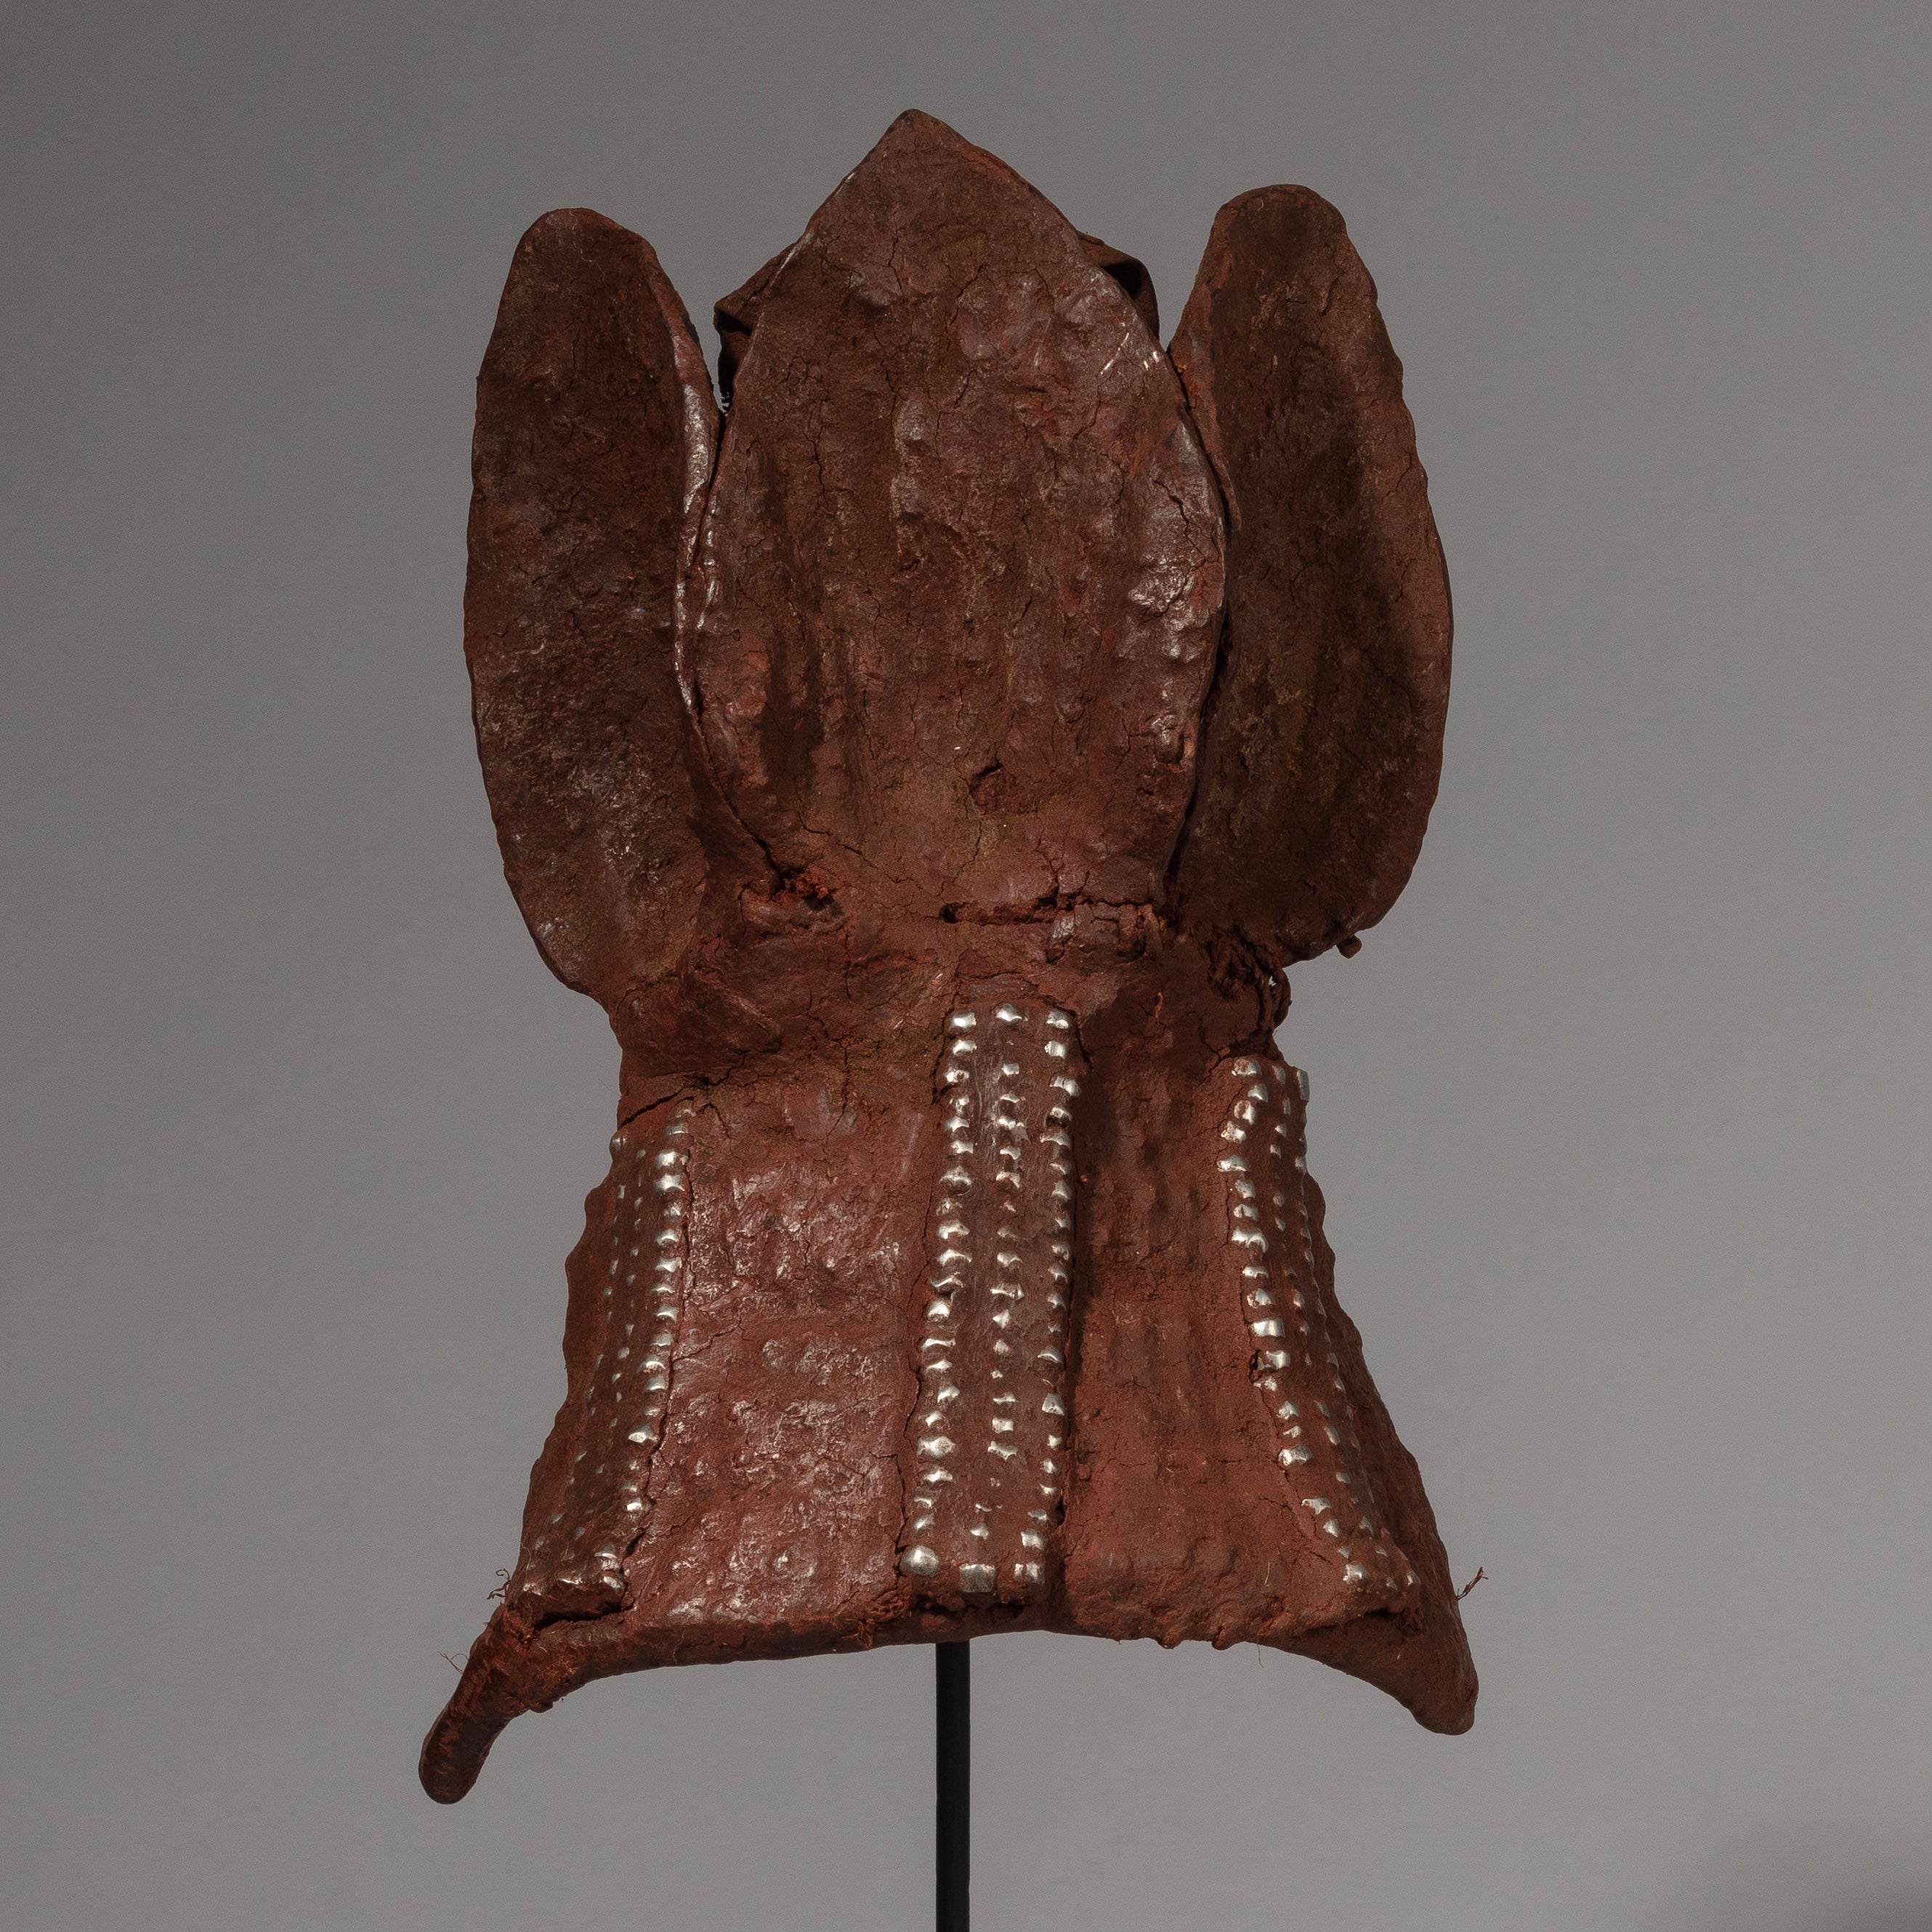 A THREE EARRED HEADDRESS FROM THE HIMBA TRIBE OF NAMIBIA SW AFRICA ( No 965)